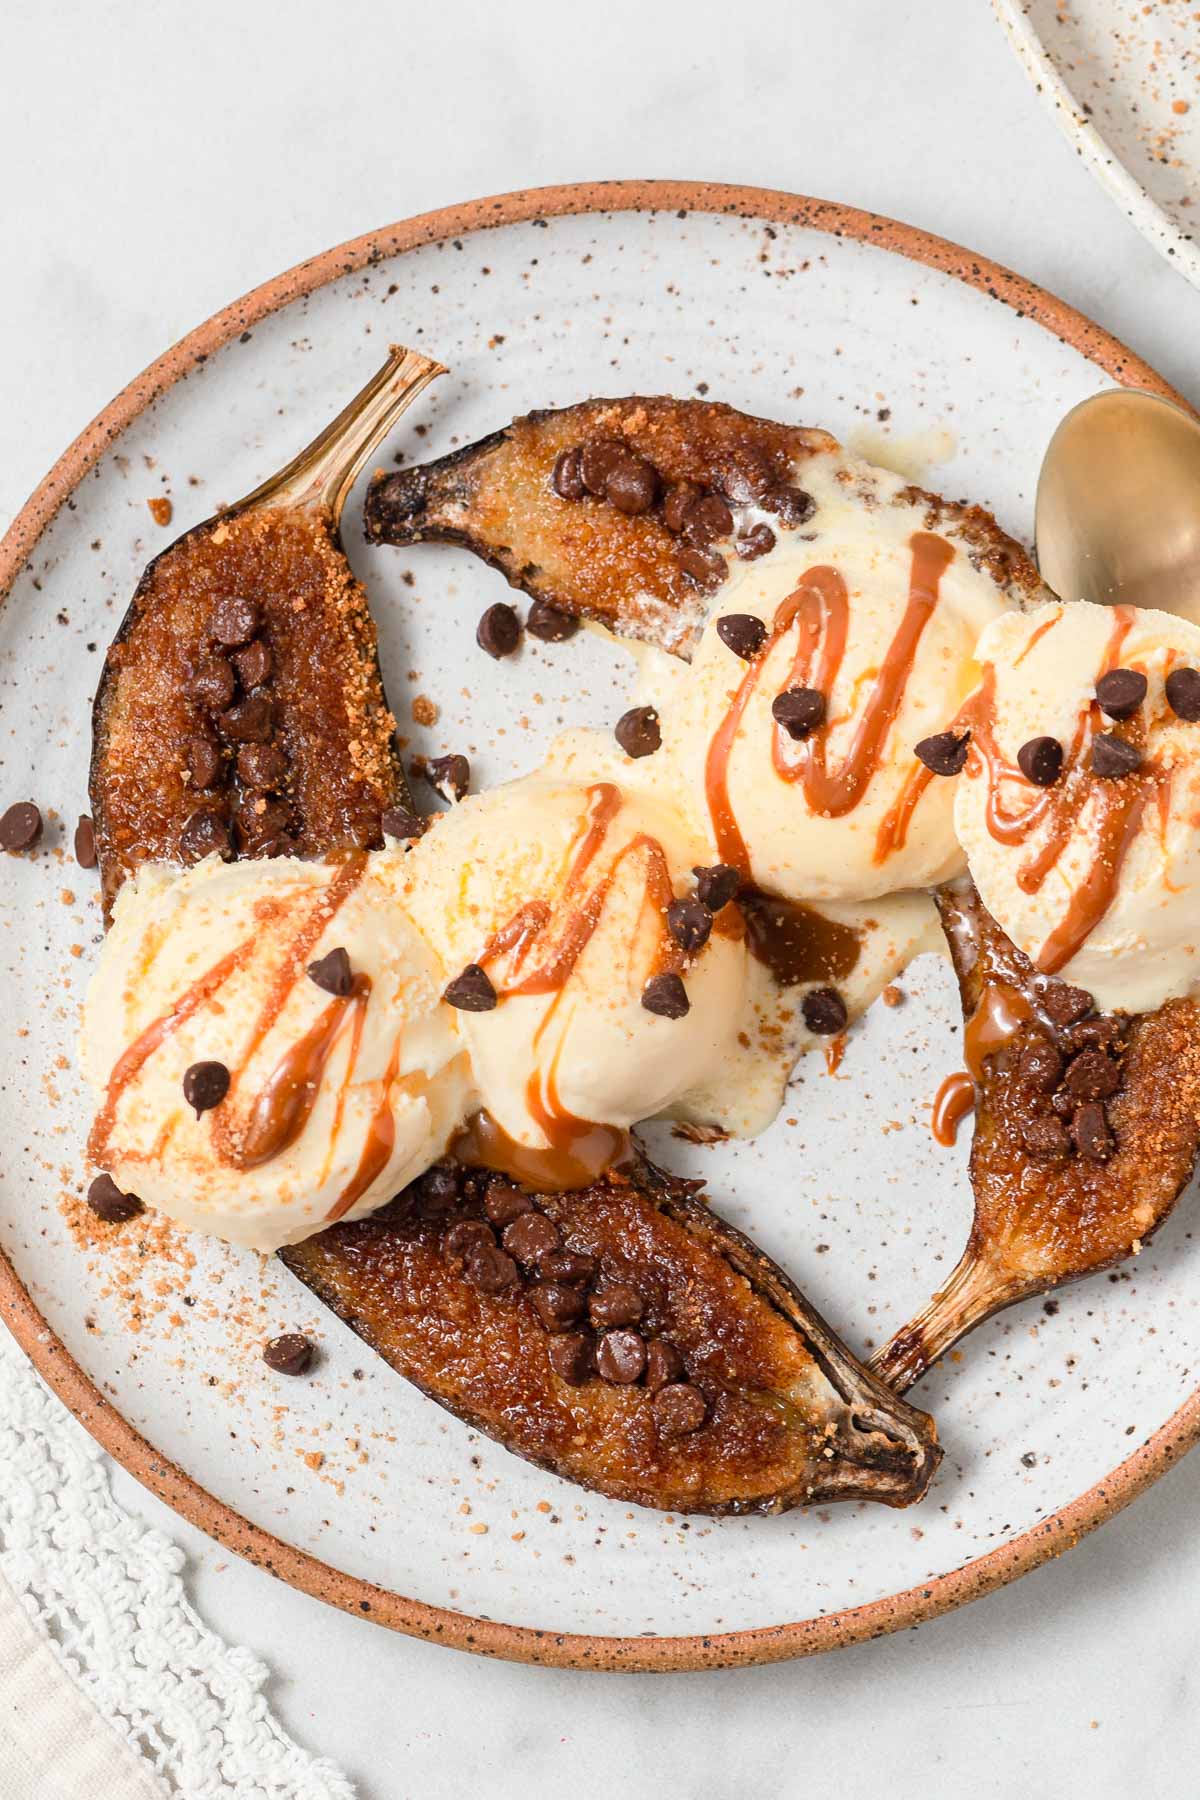 air fryer caramelized bananas on a plate with ice cream and caramel syrup.